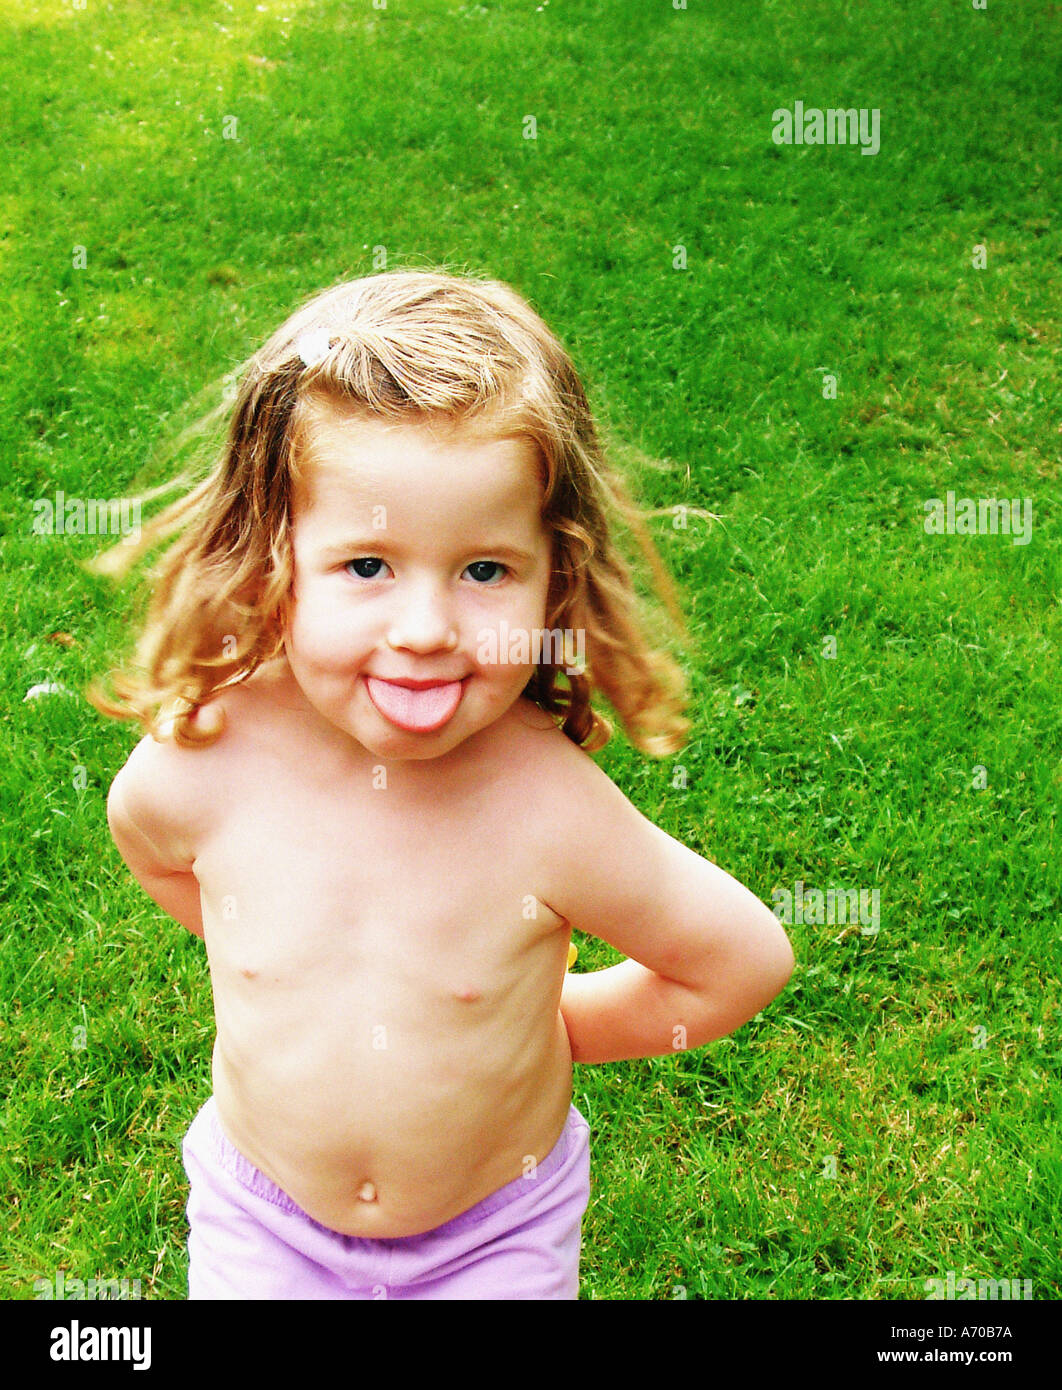 Cheeky Girl Pulling Tongue Out Fotos E Imágenes De Stock Alamy